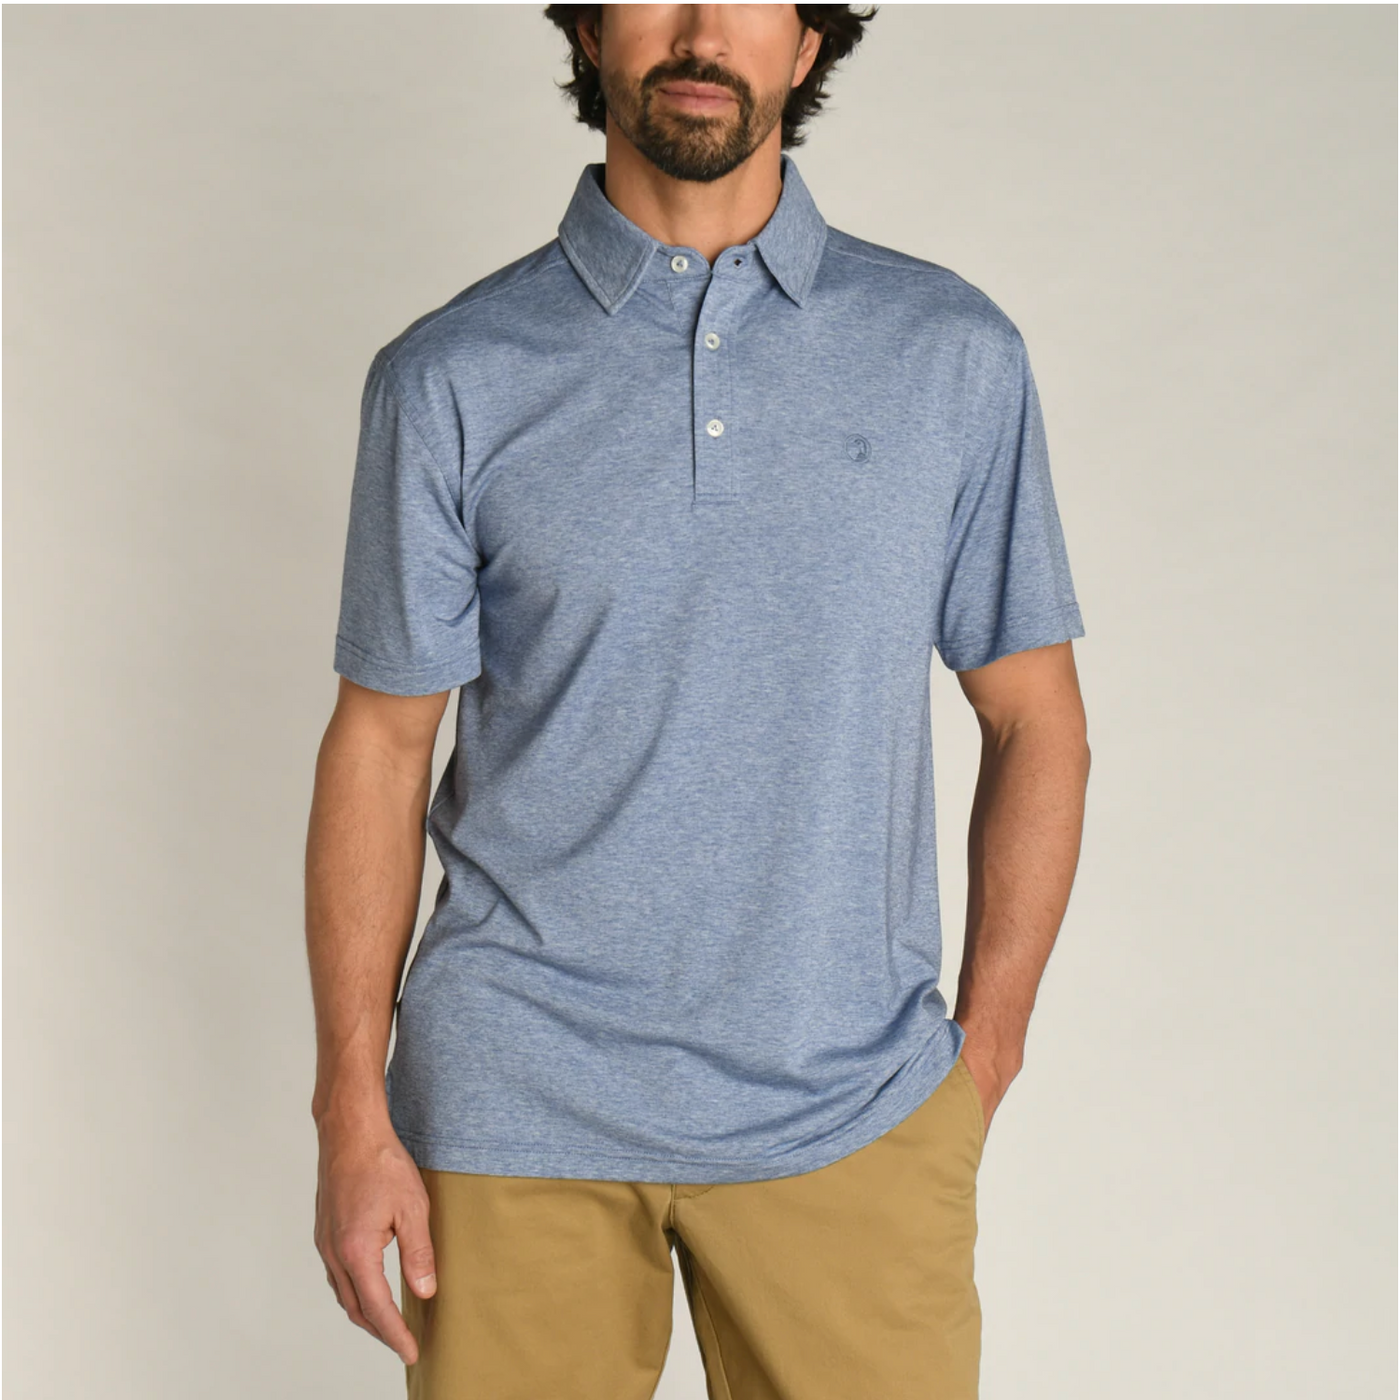 DUCK HEAD Men's SS Hayes Performance Polo